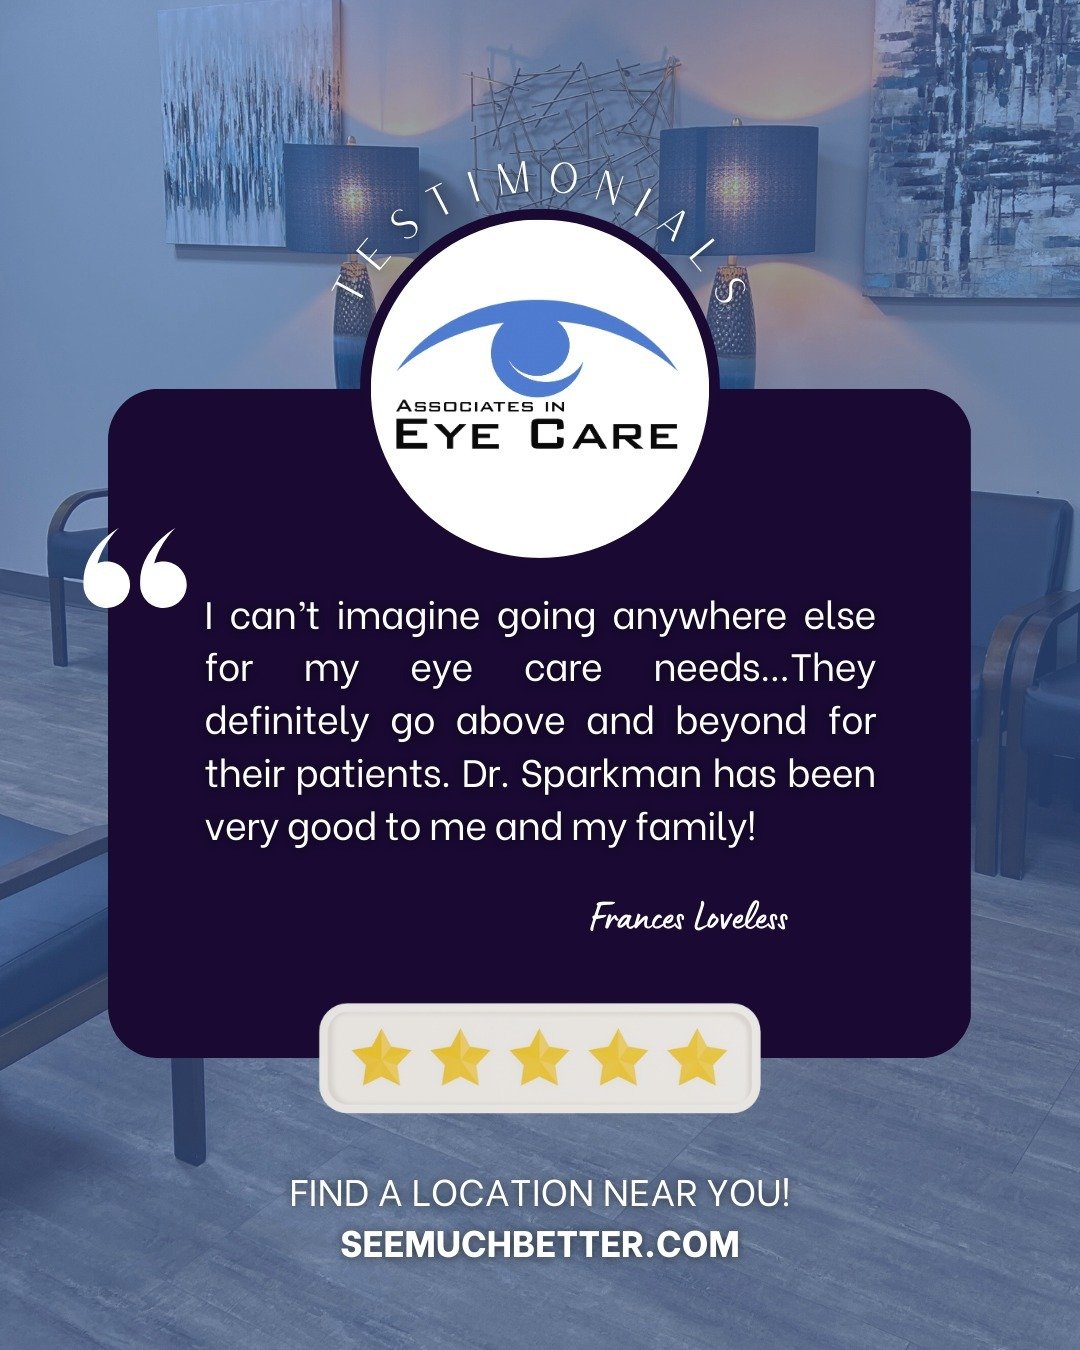 We love our patients at all eight locations! Thanks for your kind review Frances in Somerset, KY! Find a location near you at seemuchbetter.com. 

&quot;I can&rsquo;t imagine going anywhere else for my eye care needs&hellip;They definitely go above a